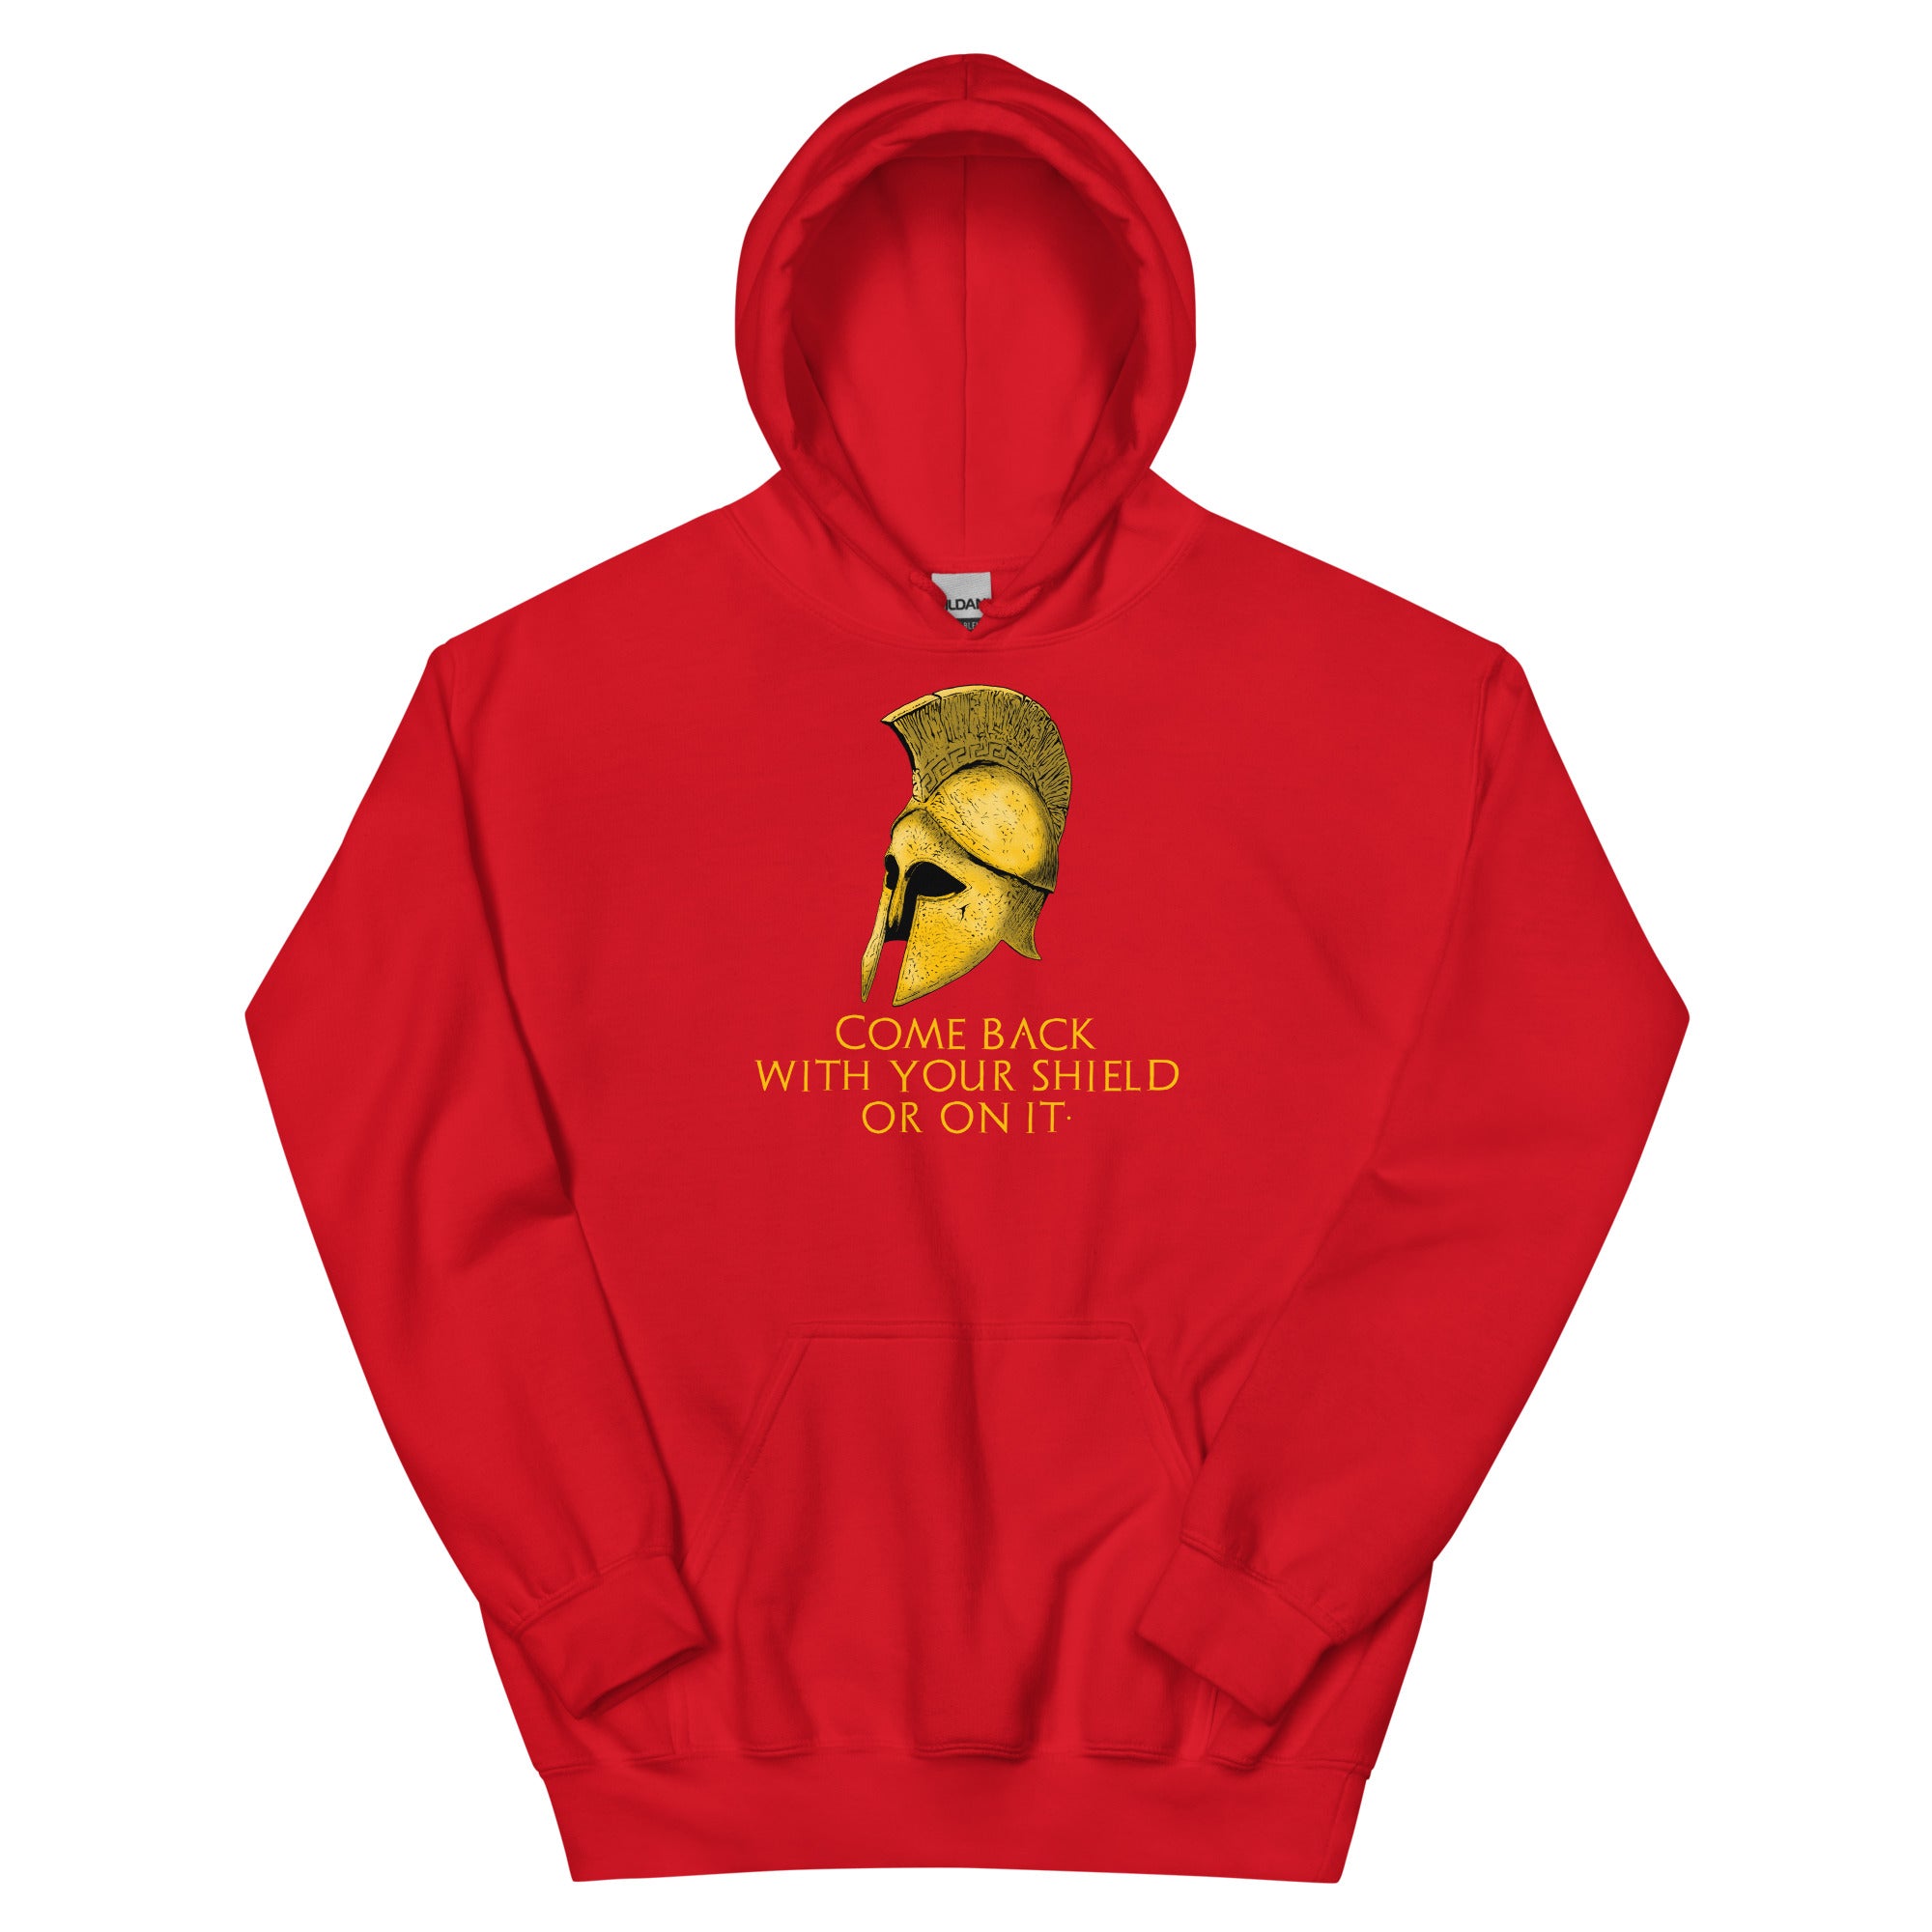 Come back with your shield or on it - Ancient Sparta - Unisex Hoodie